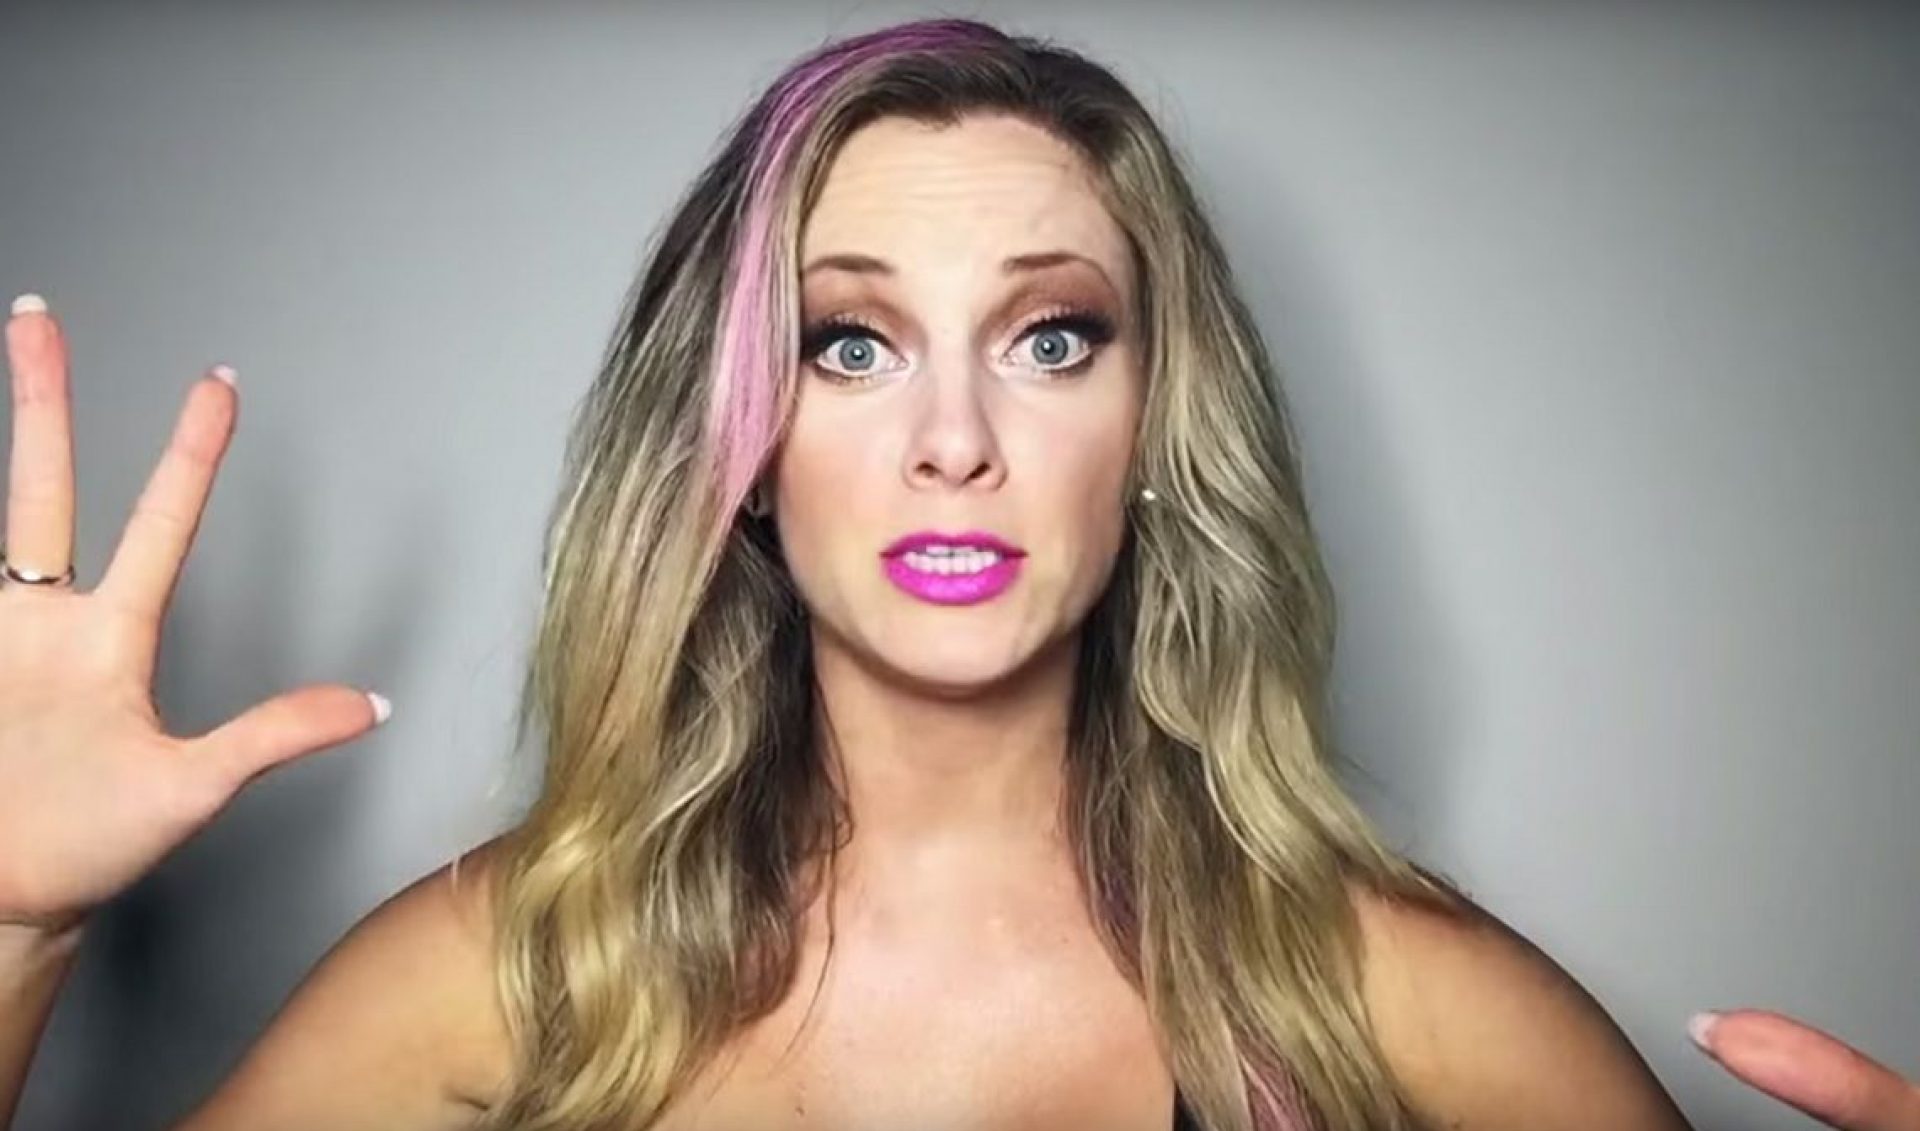 Nicole Arbour’s YouTube Channel Suspended, Reinstated After Obesity Video Causes Major Controversy